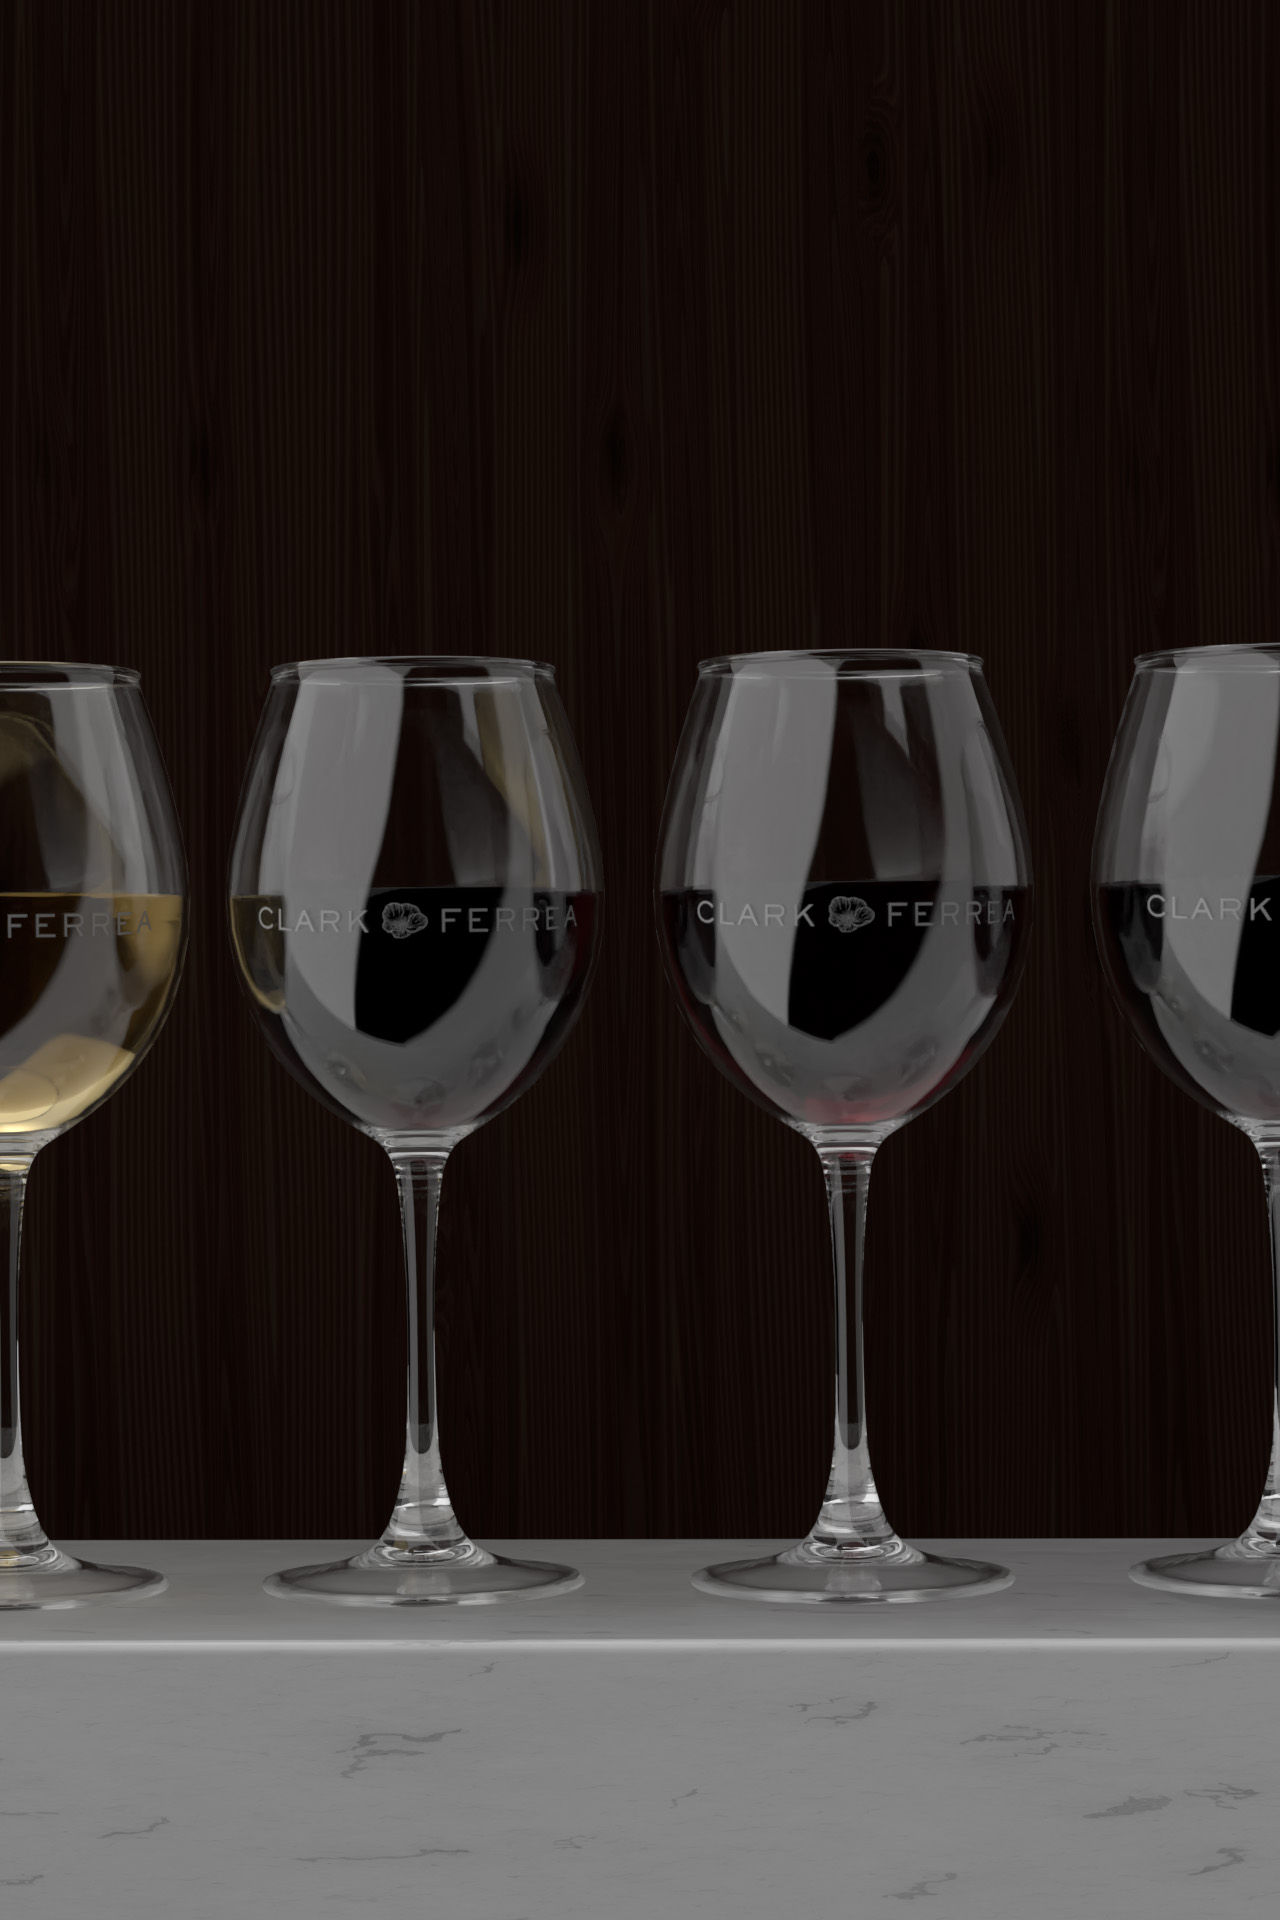 Four Clark Ferrea branded wine glasses with one white wine and three red wines